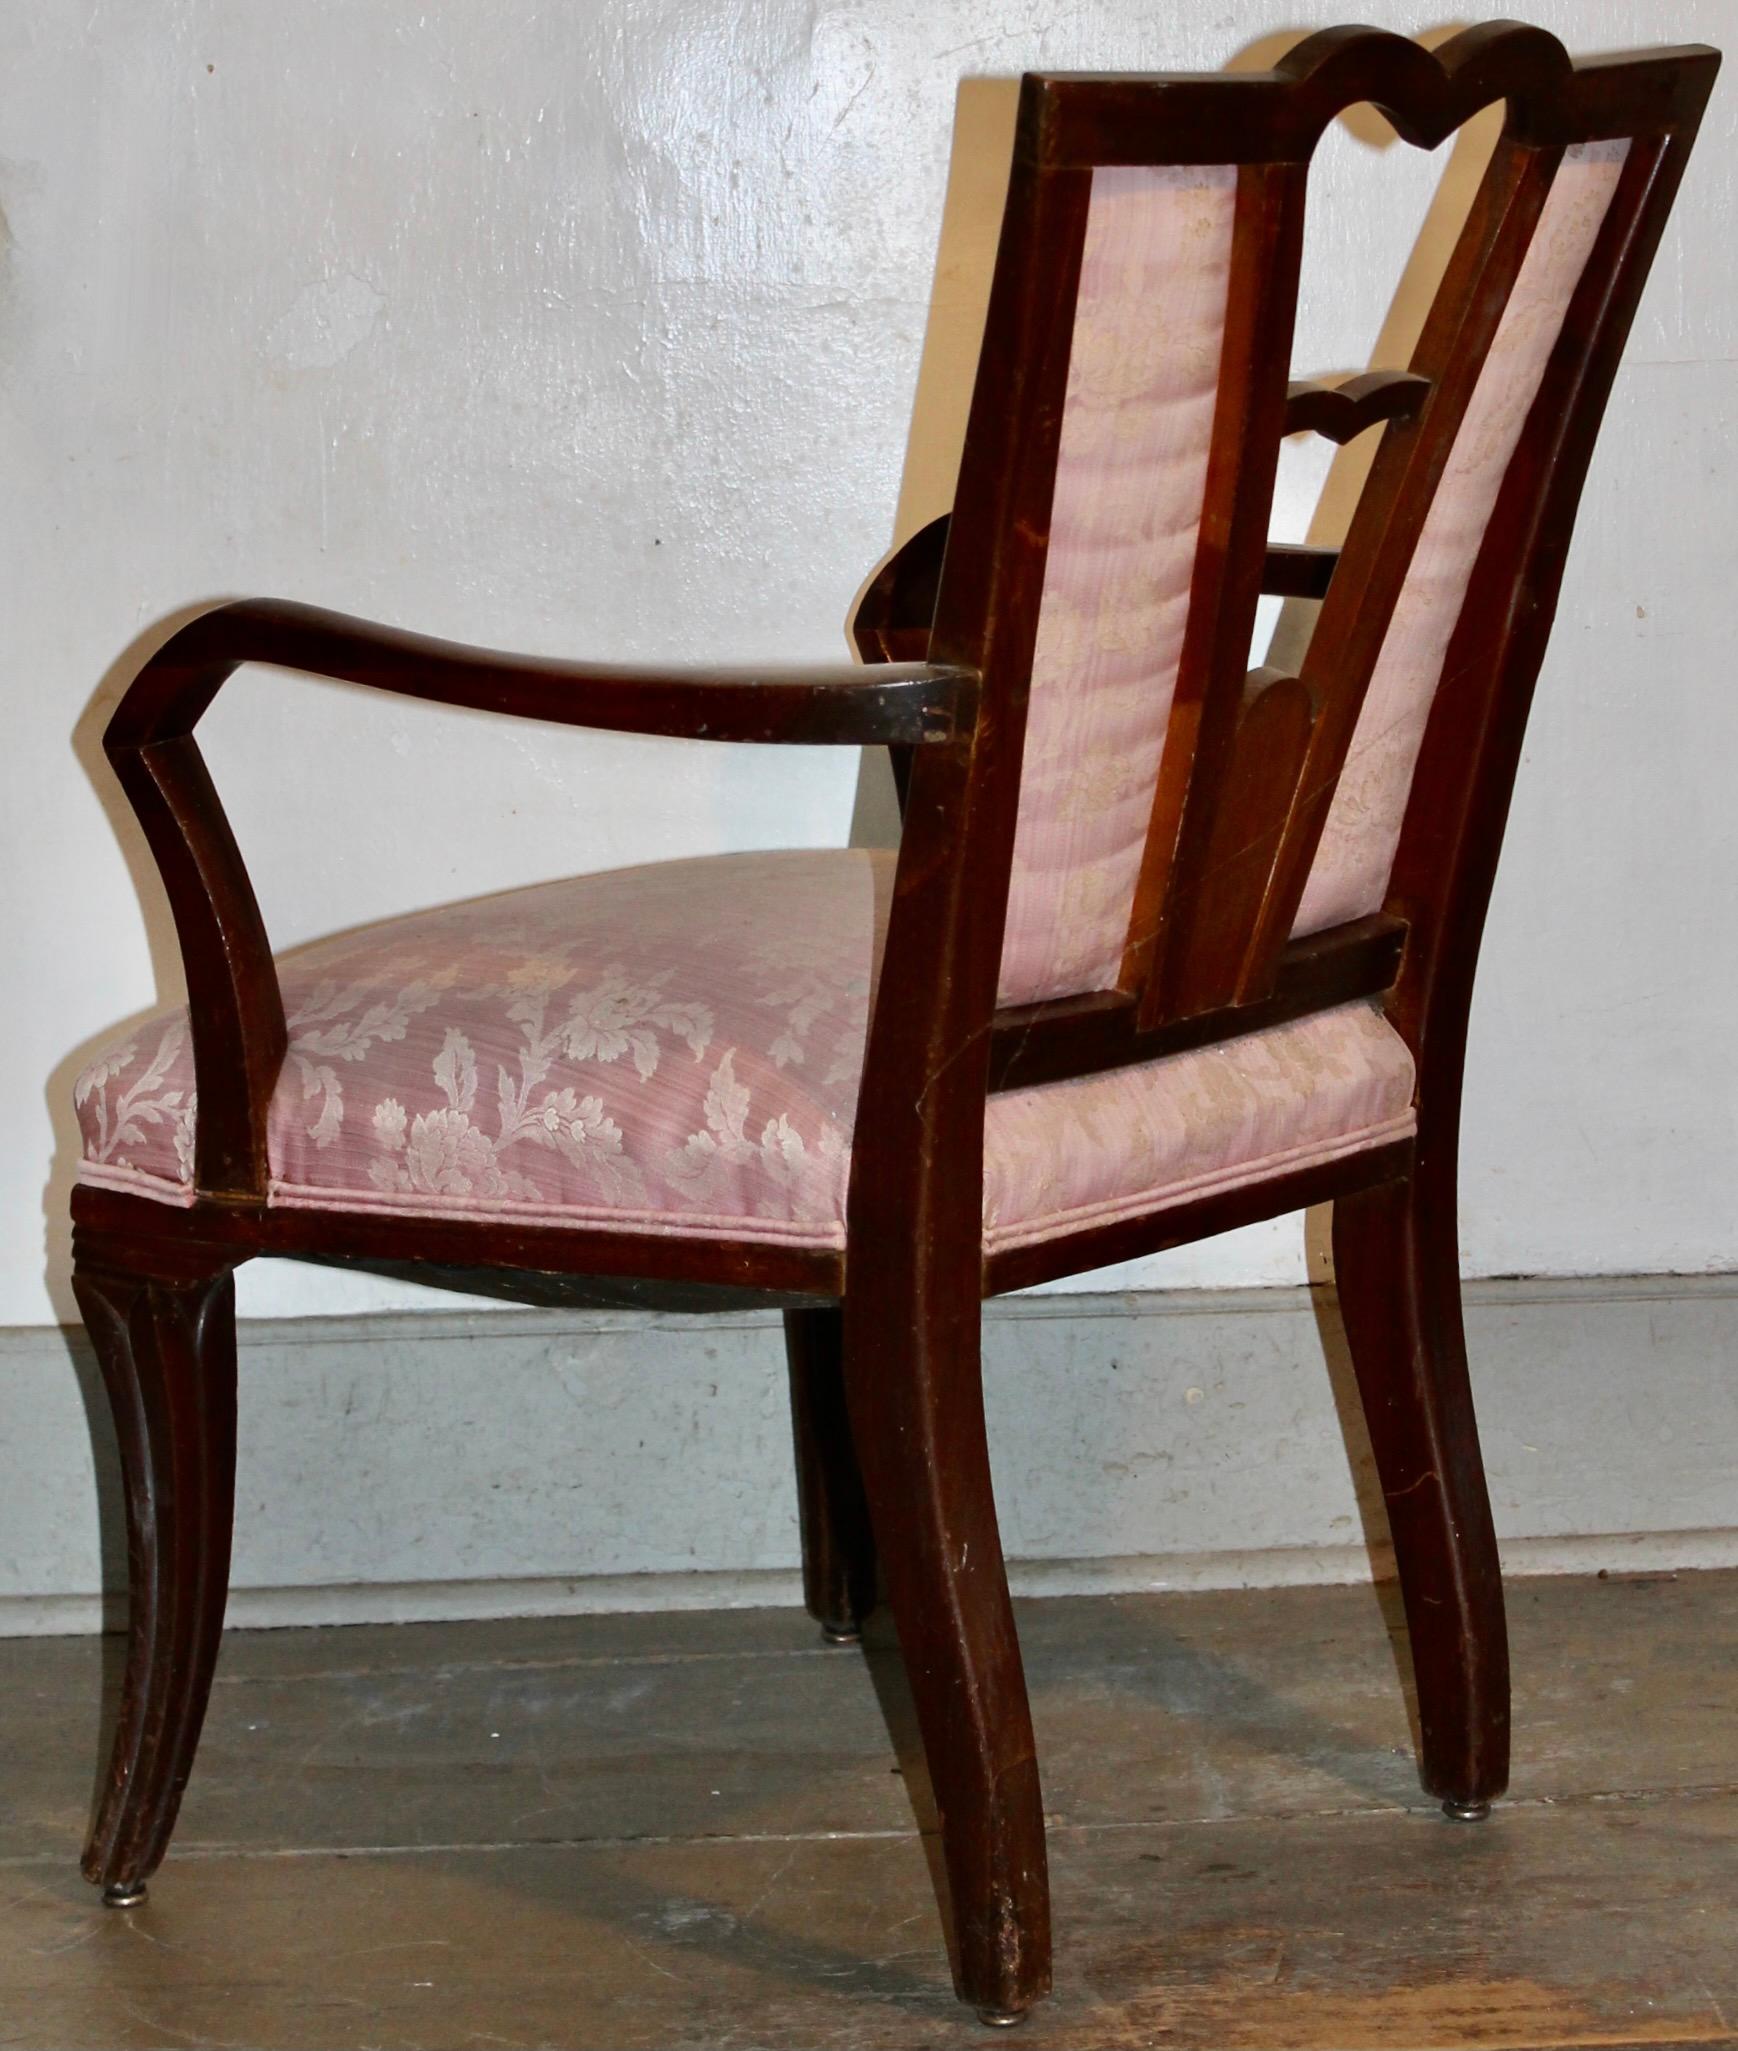 Mahogany Eugene Schoen Pair Armchairs by Schmieg Hungate and Kotzian c.1929 For Sale